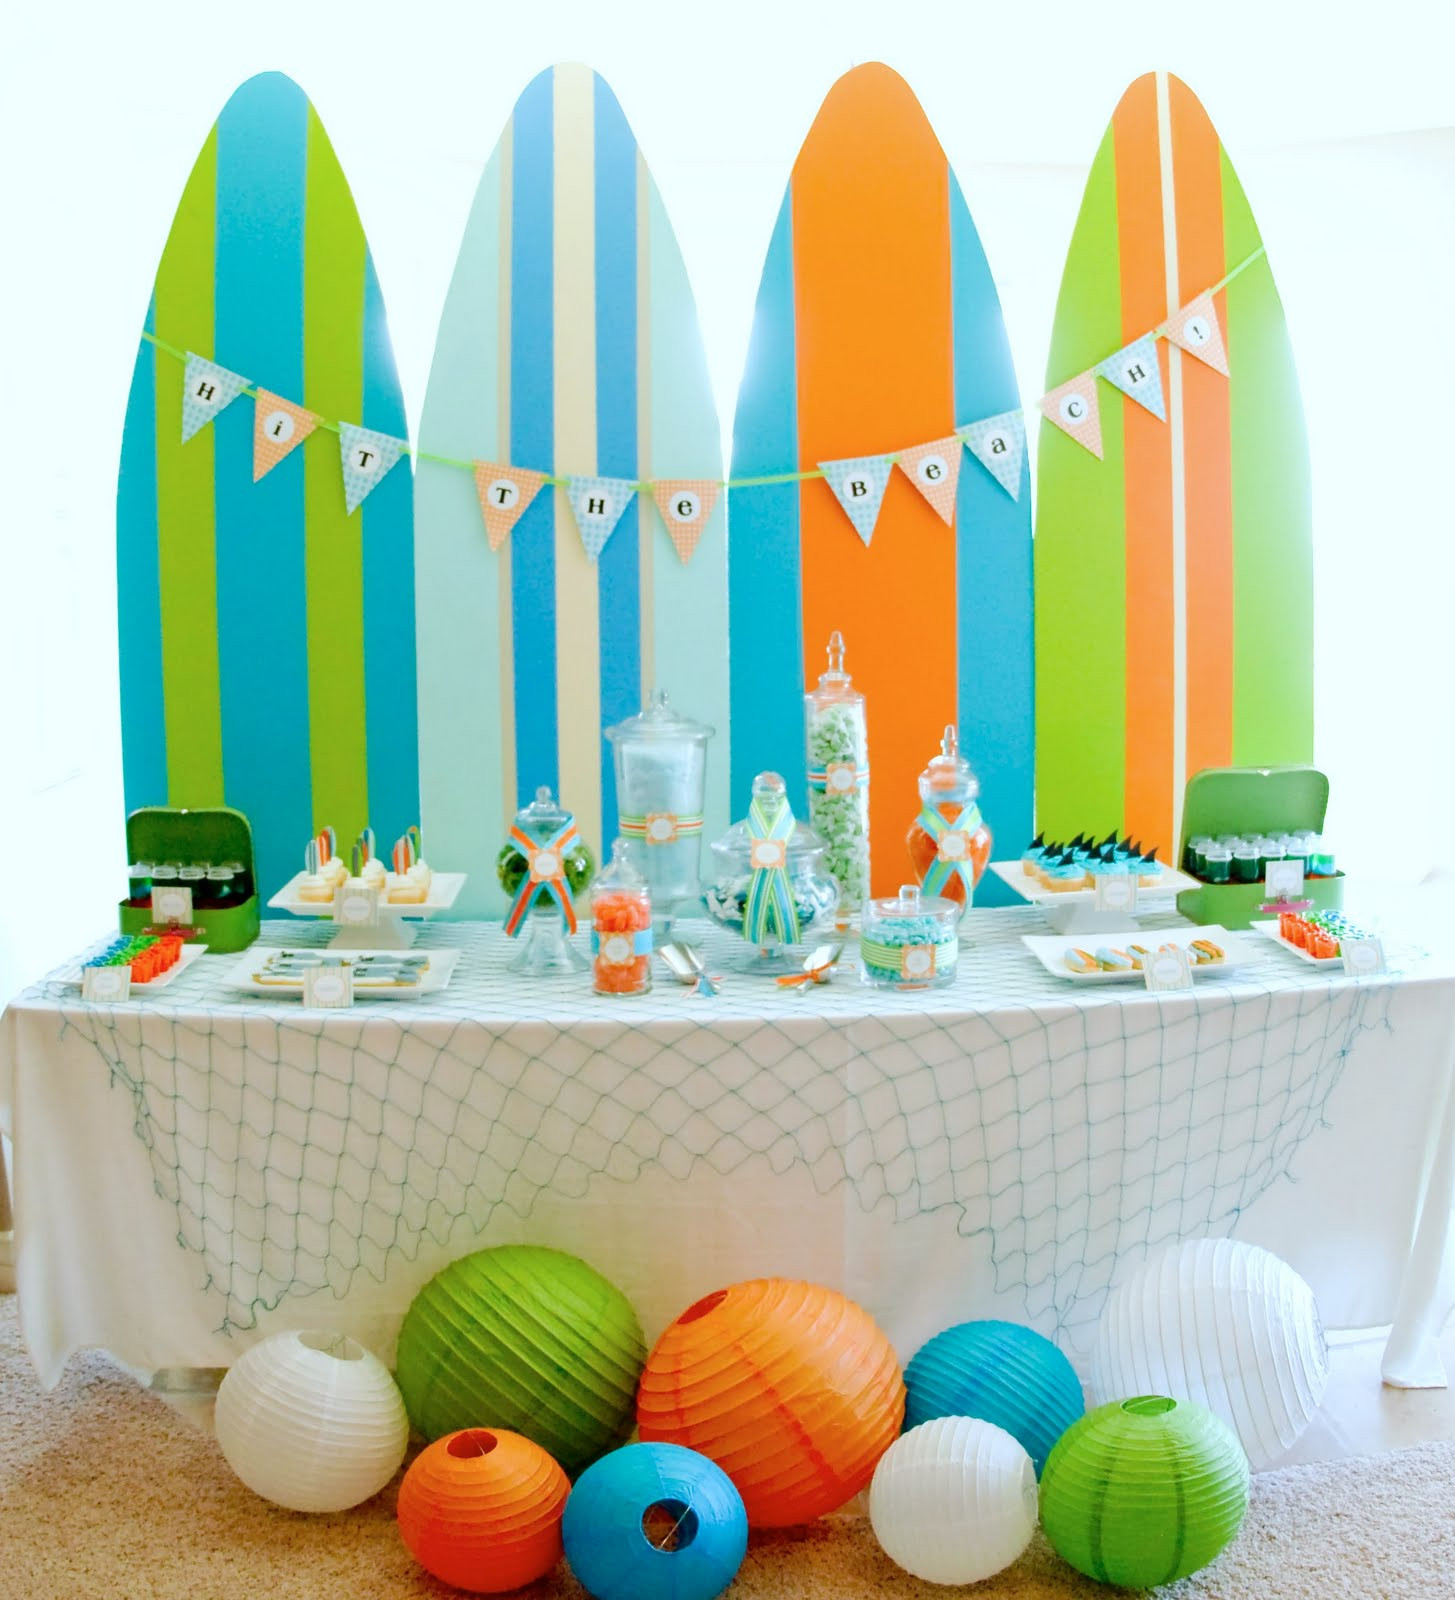 Decorating Ideas For Beach Party
 Kara s Party Ideas Surf s Up Summer Pool Party